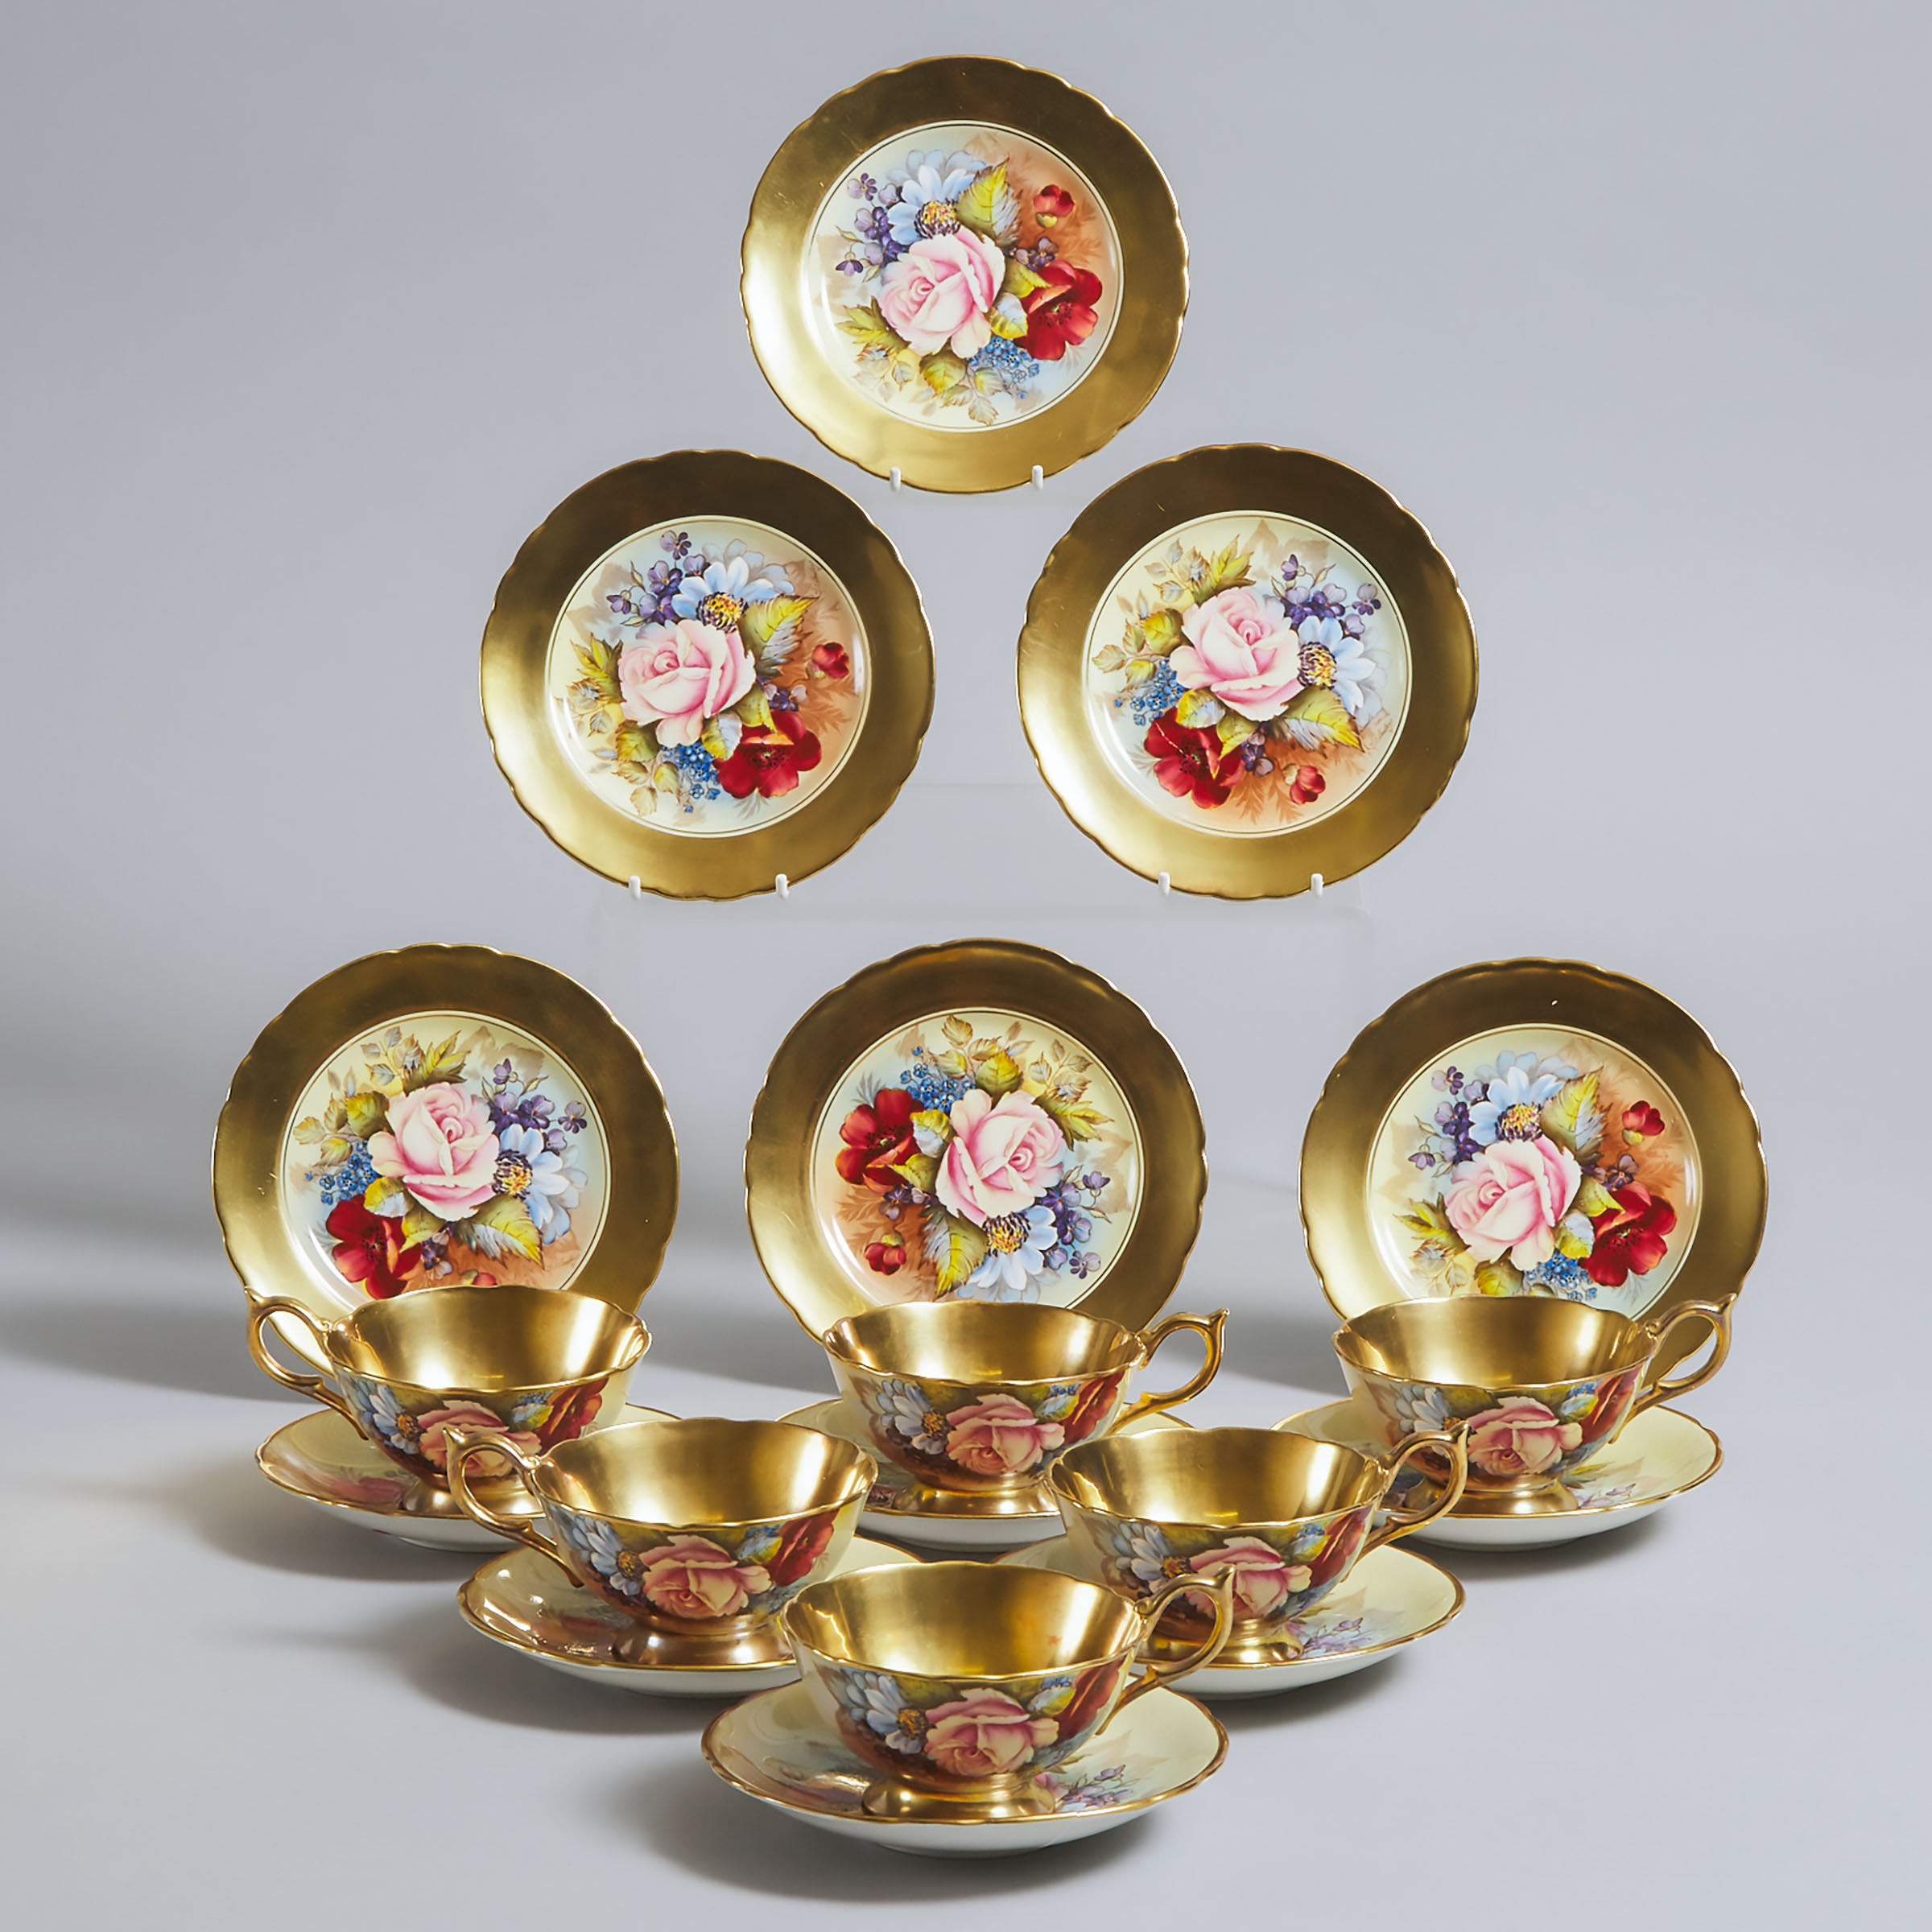 Six Aynsley 'Cabbage Rose' Tea Cups, Saucers and Plates, J.A. Bailey, 20th century